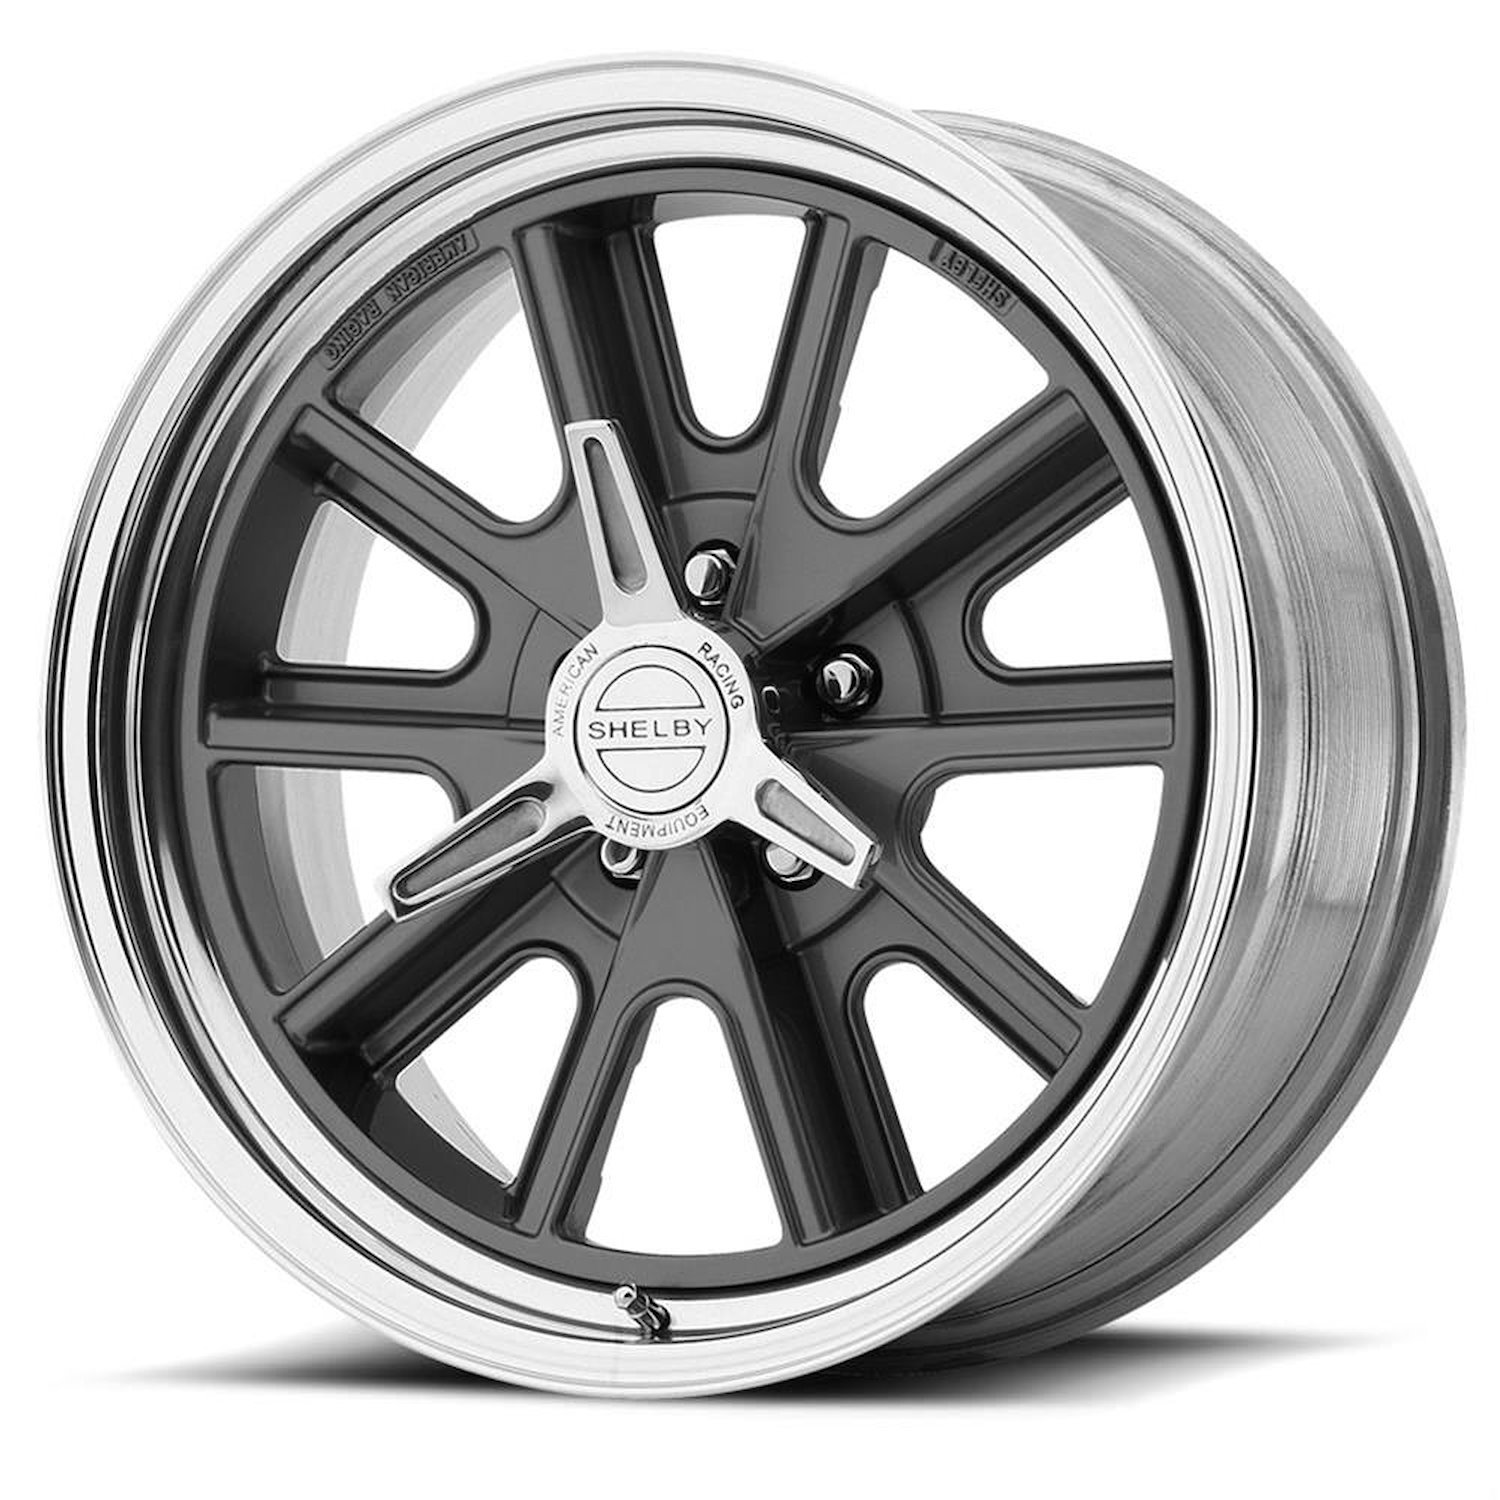 AMERICAN RACING 427 SHELBY COBRA TWO-PIECE MAG GRAY CENTER POLISHED BARREL 17 x 11 5x4.5 -50 4.03